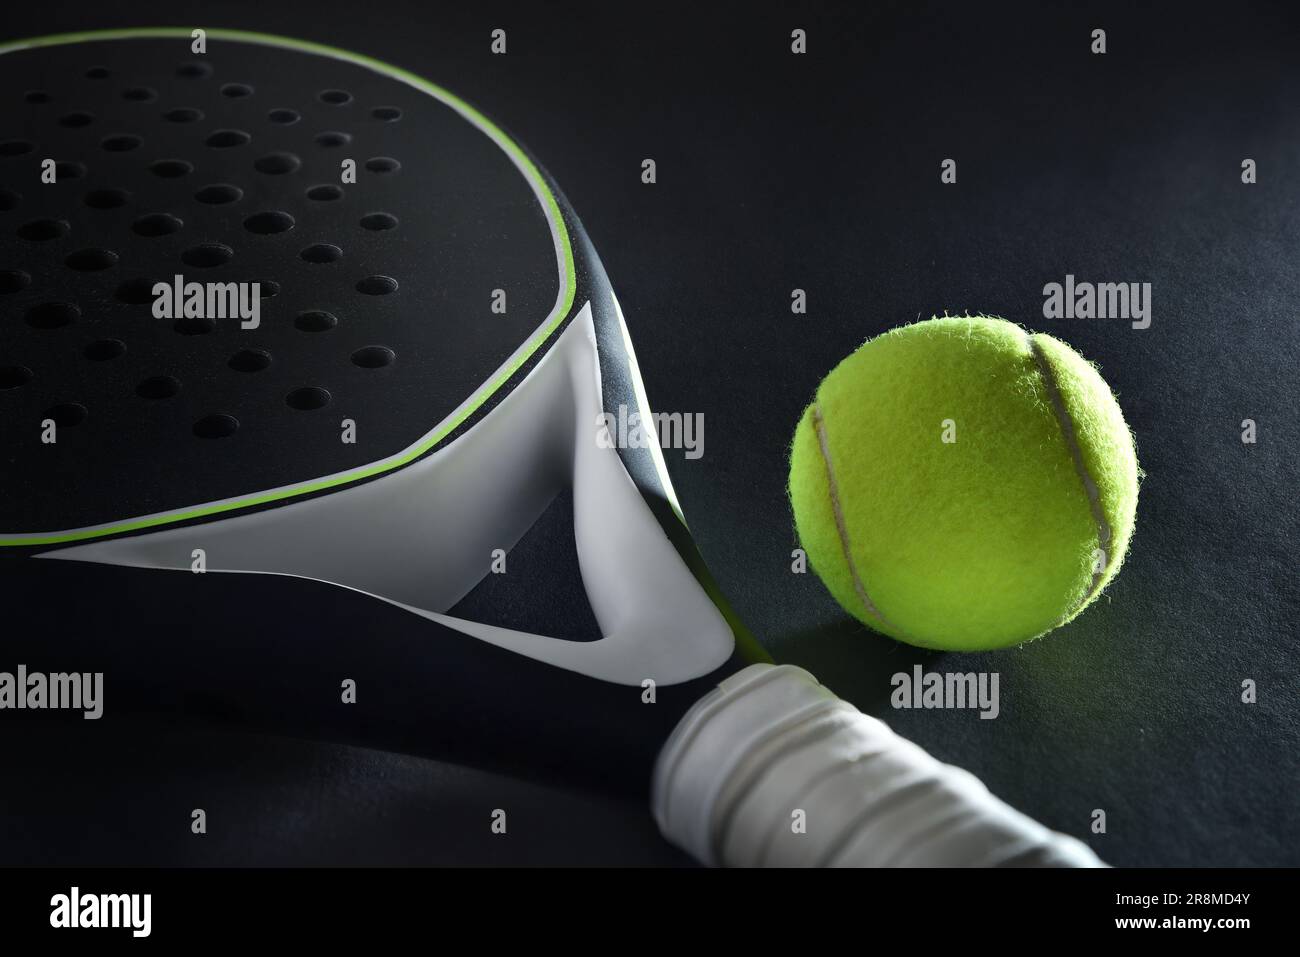 Detailed background of black and white padel racket and ball on black background. Elevated view. Stock Photo